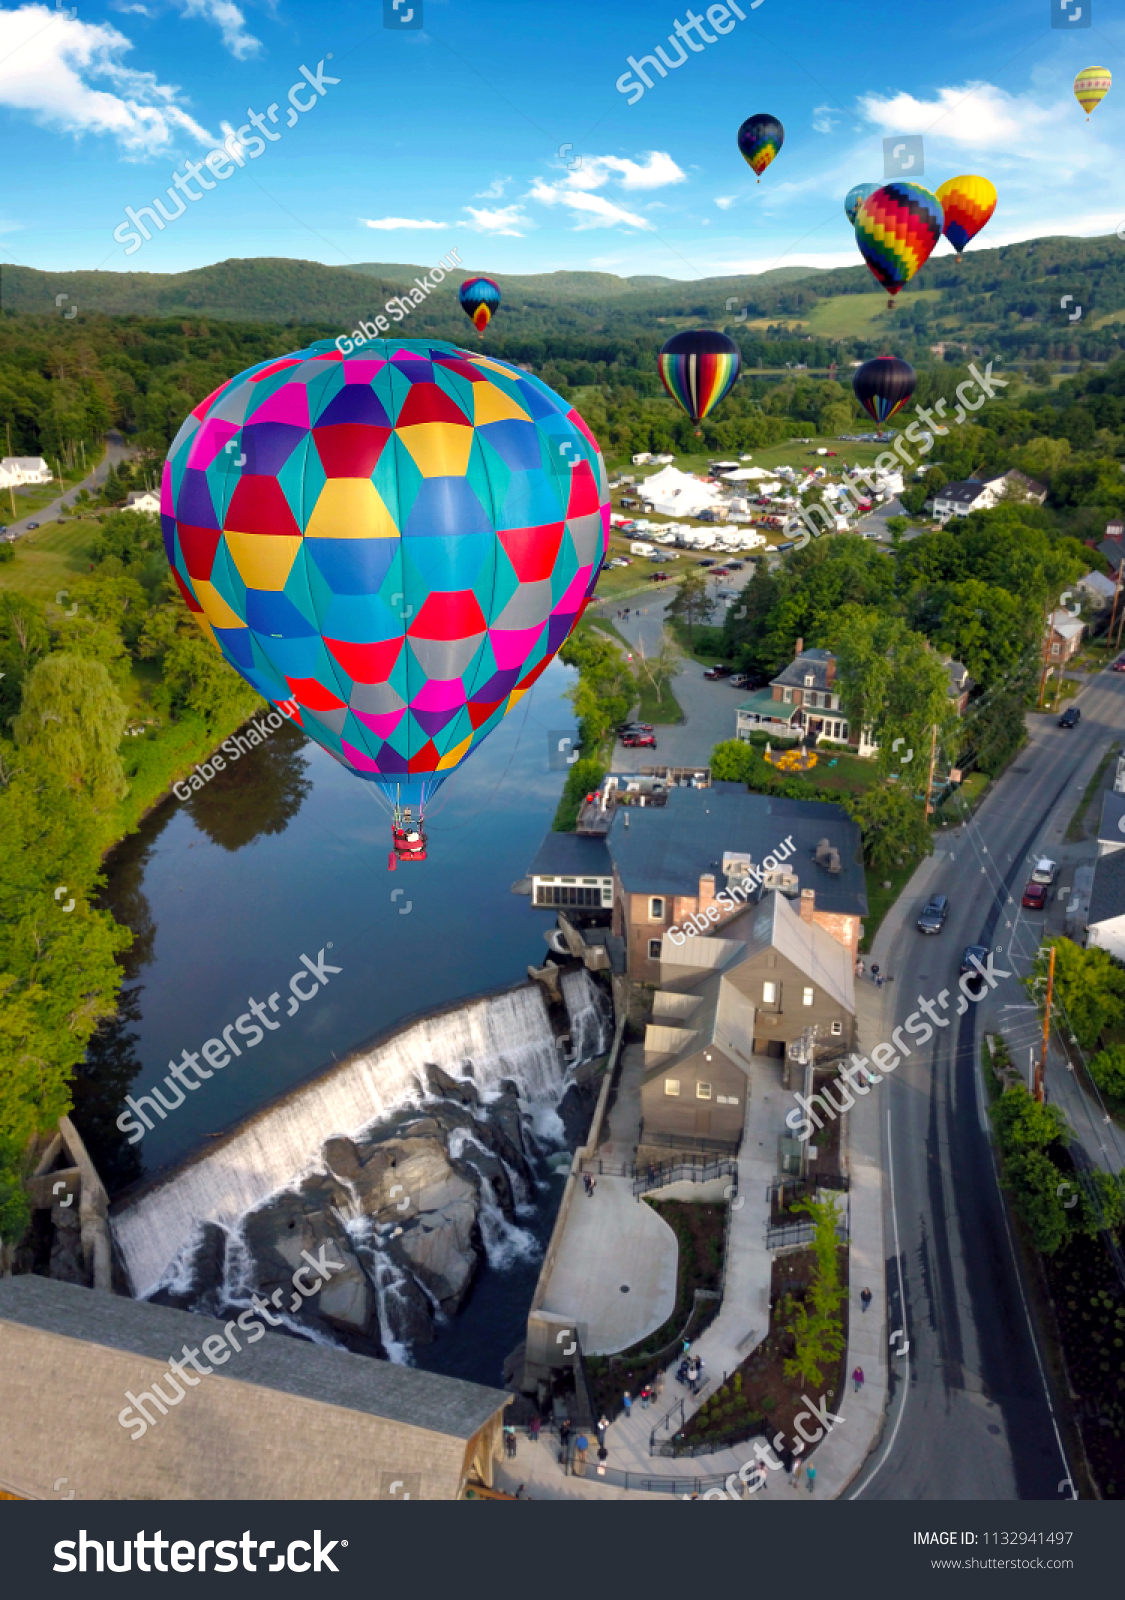 Floating above the ground through a hot air balloon festival. #1132941497